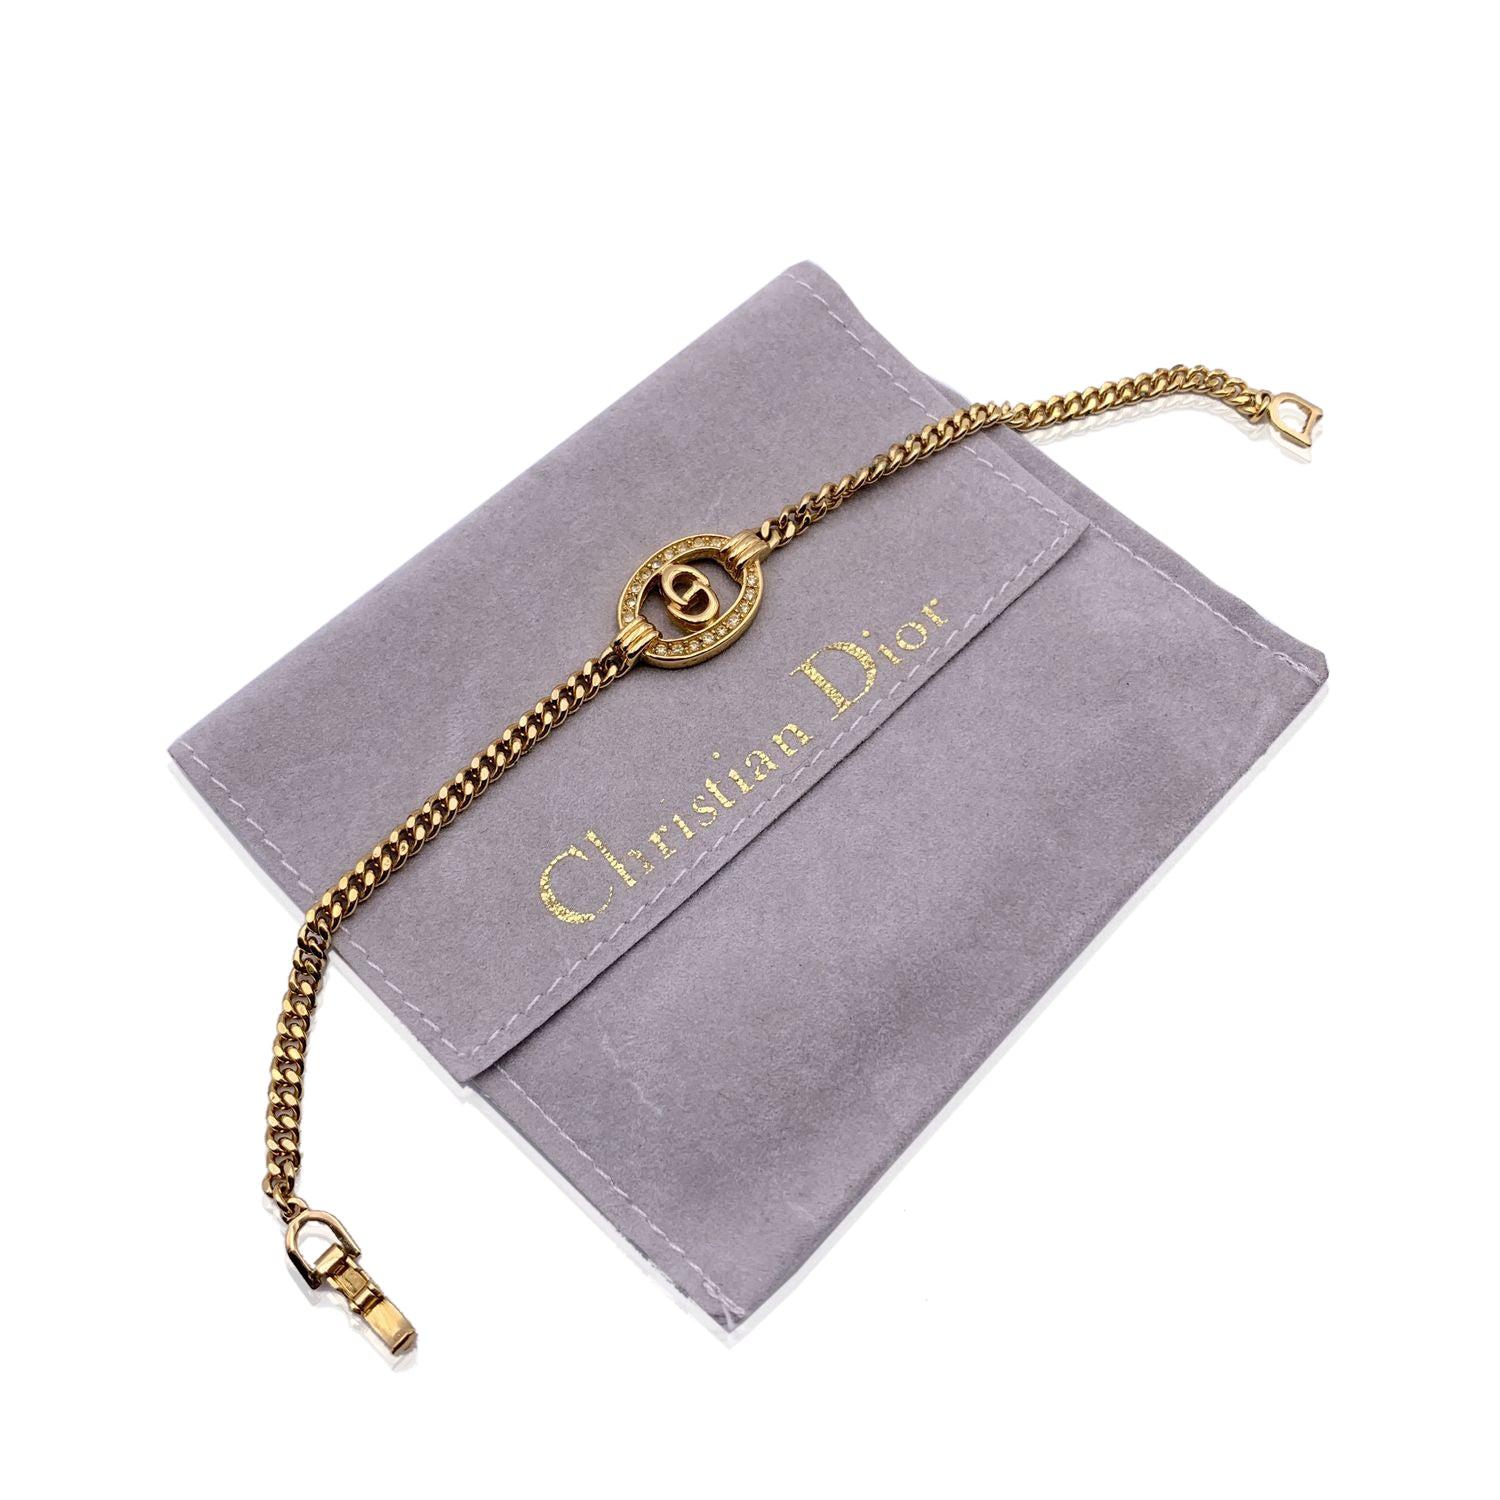 Vintage gold metal chain bracelet by CHRISTIAN DIOR. Oval CD logo element with rhinestones in the center. Spring ring closure. Internal circumference: 7 inches - 17.8 cm. 'Chr. Dior' engraved on the closure. Condition A - EXCELLENT Gently used.